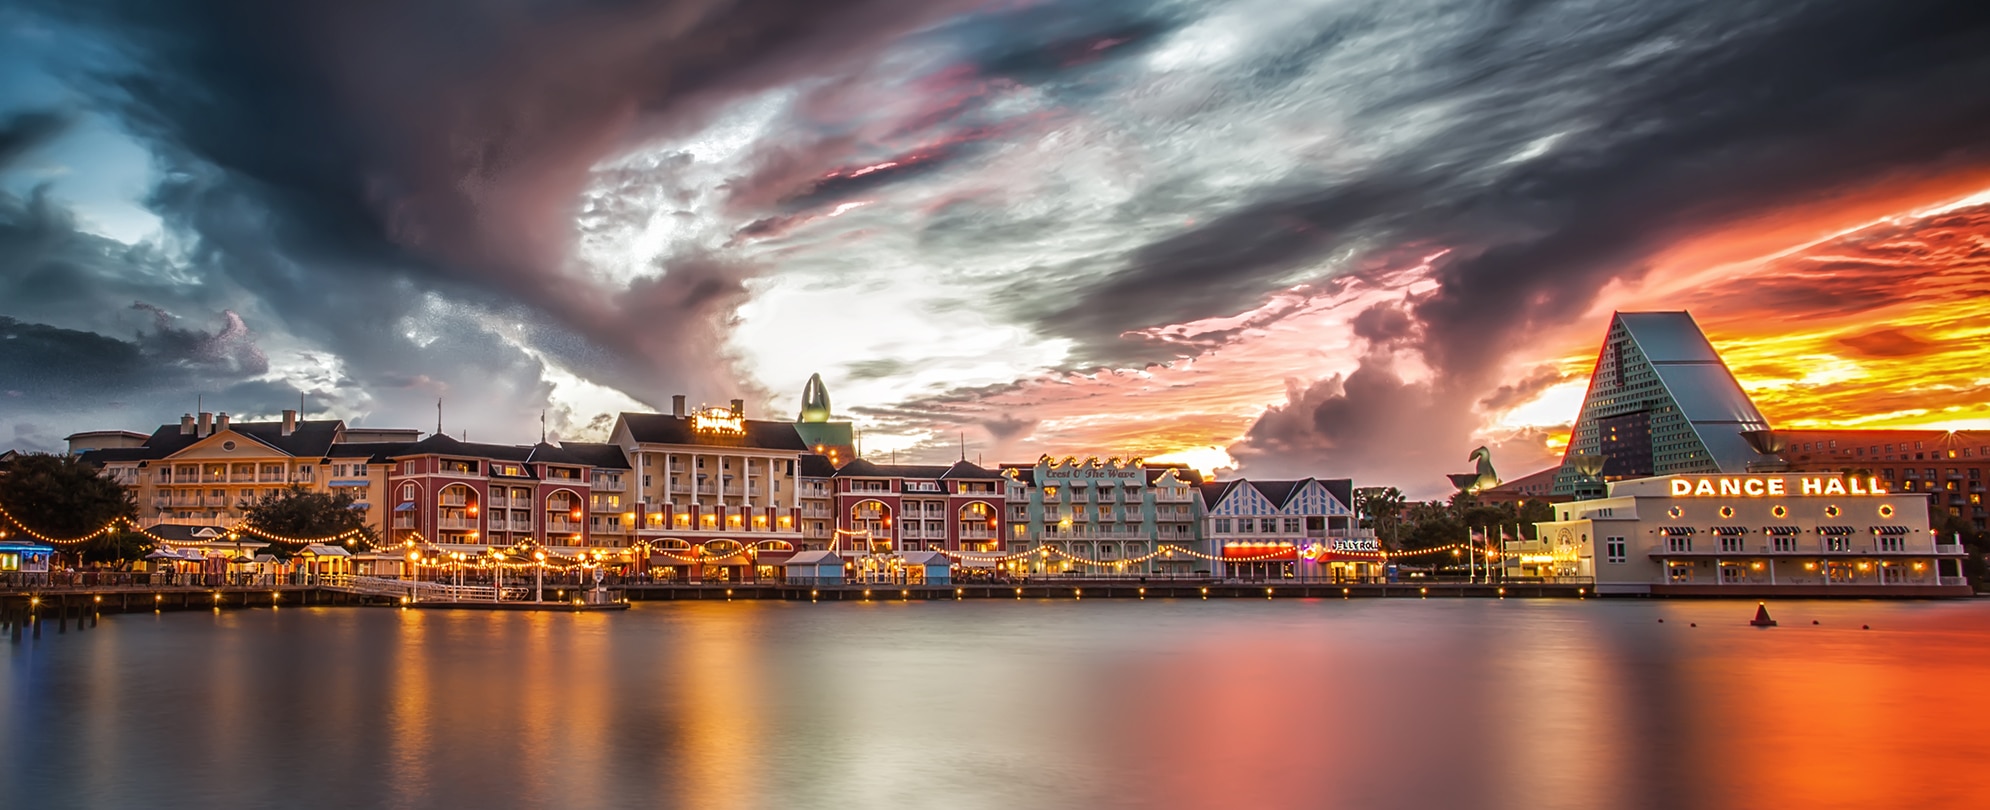 Disney's Boardwalk, a waterfront resort and entertainment, dining, and shopping area in Orlando, Florida lit up at sunset.